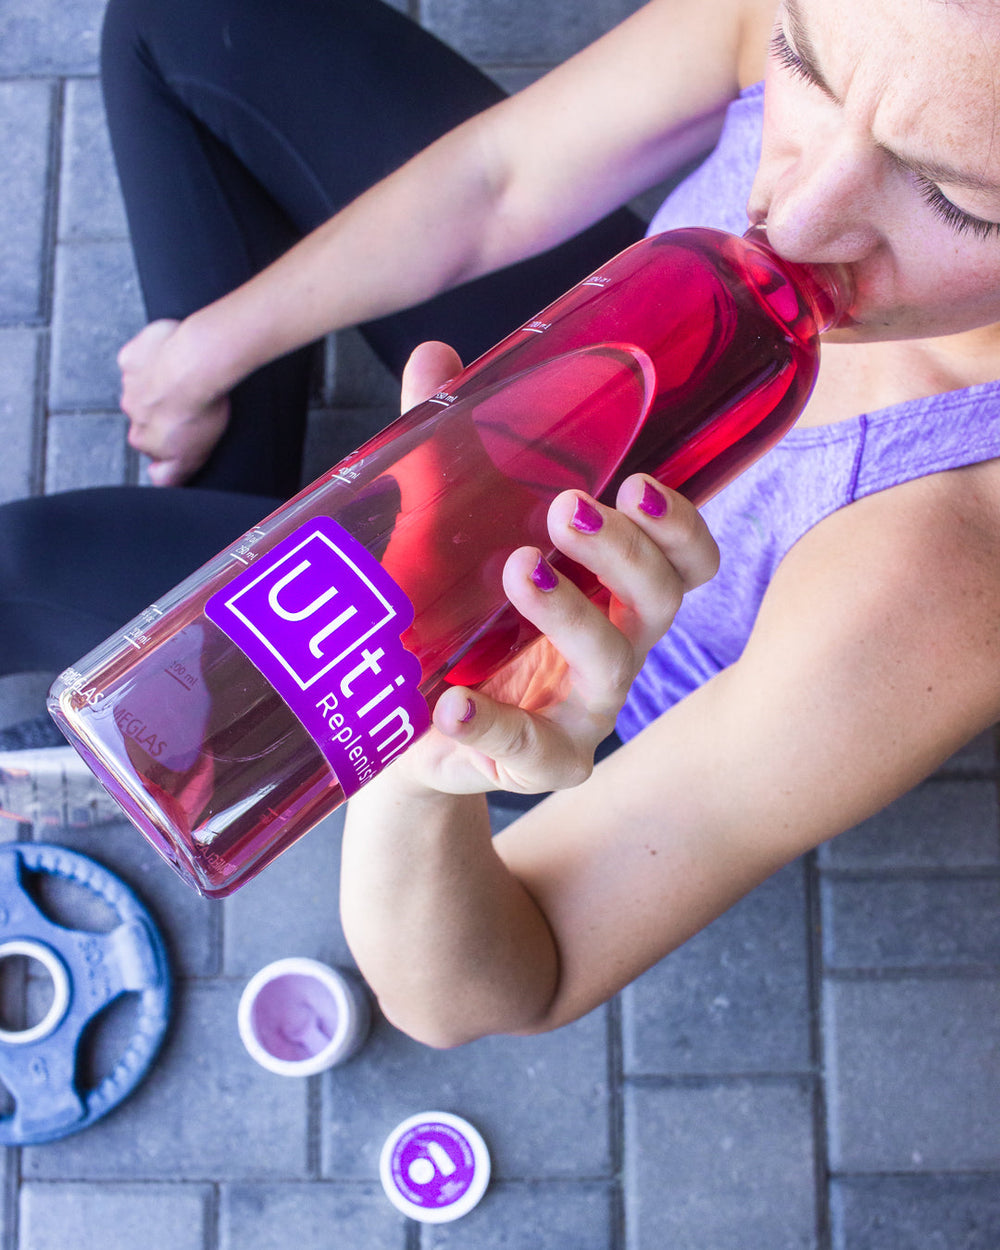 Woman rehydrating after a workout with Ultima Replenisher Electrolyte Hydration Mix